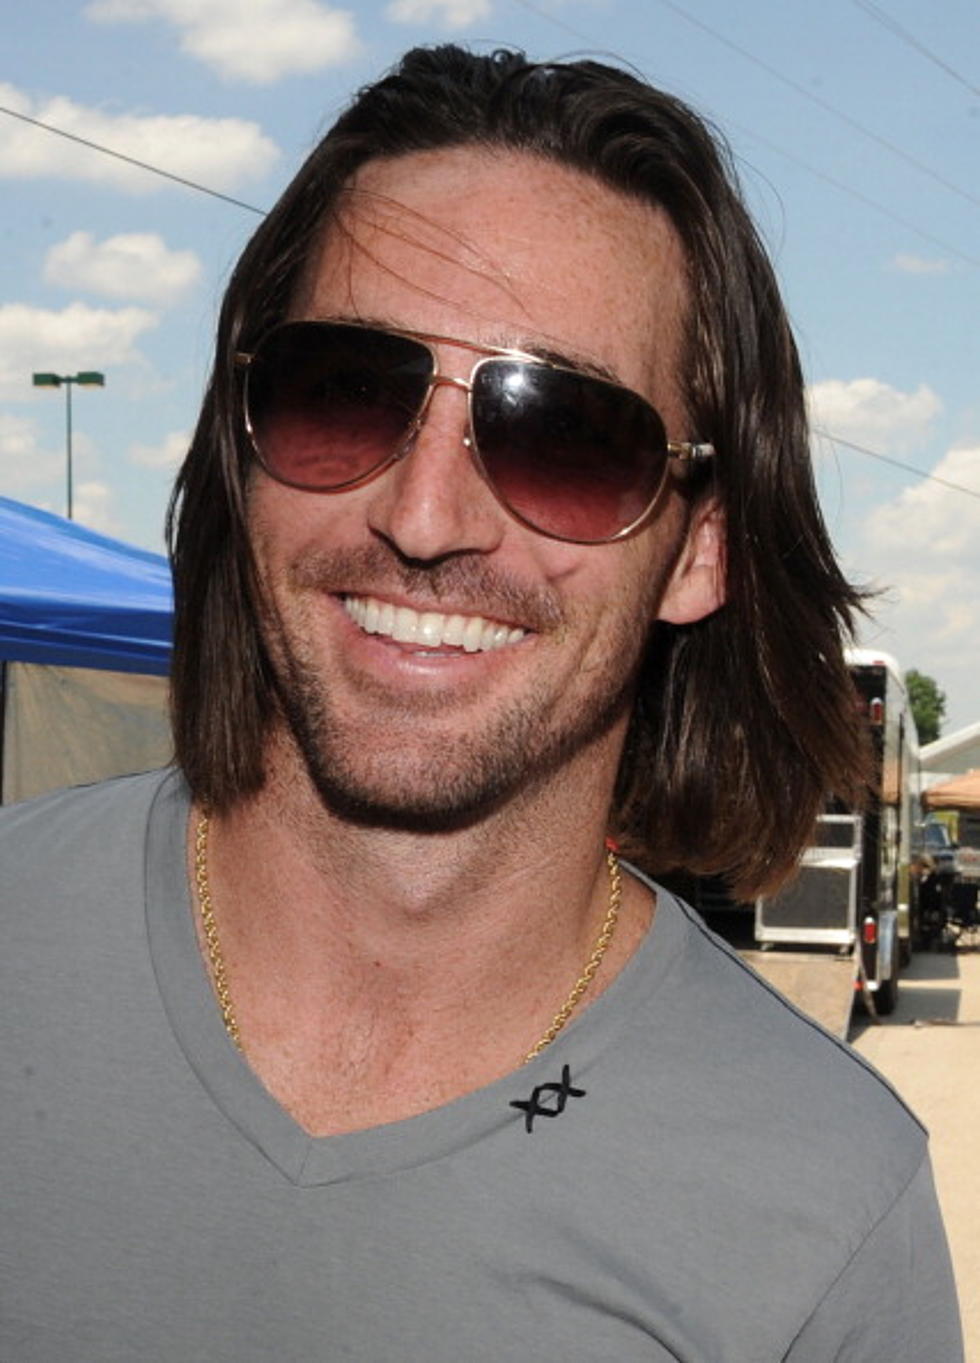 Jake Owen May Have Back To Back Hits With New Song “Alone With You” [VIDEO]